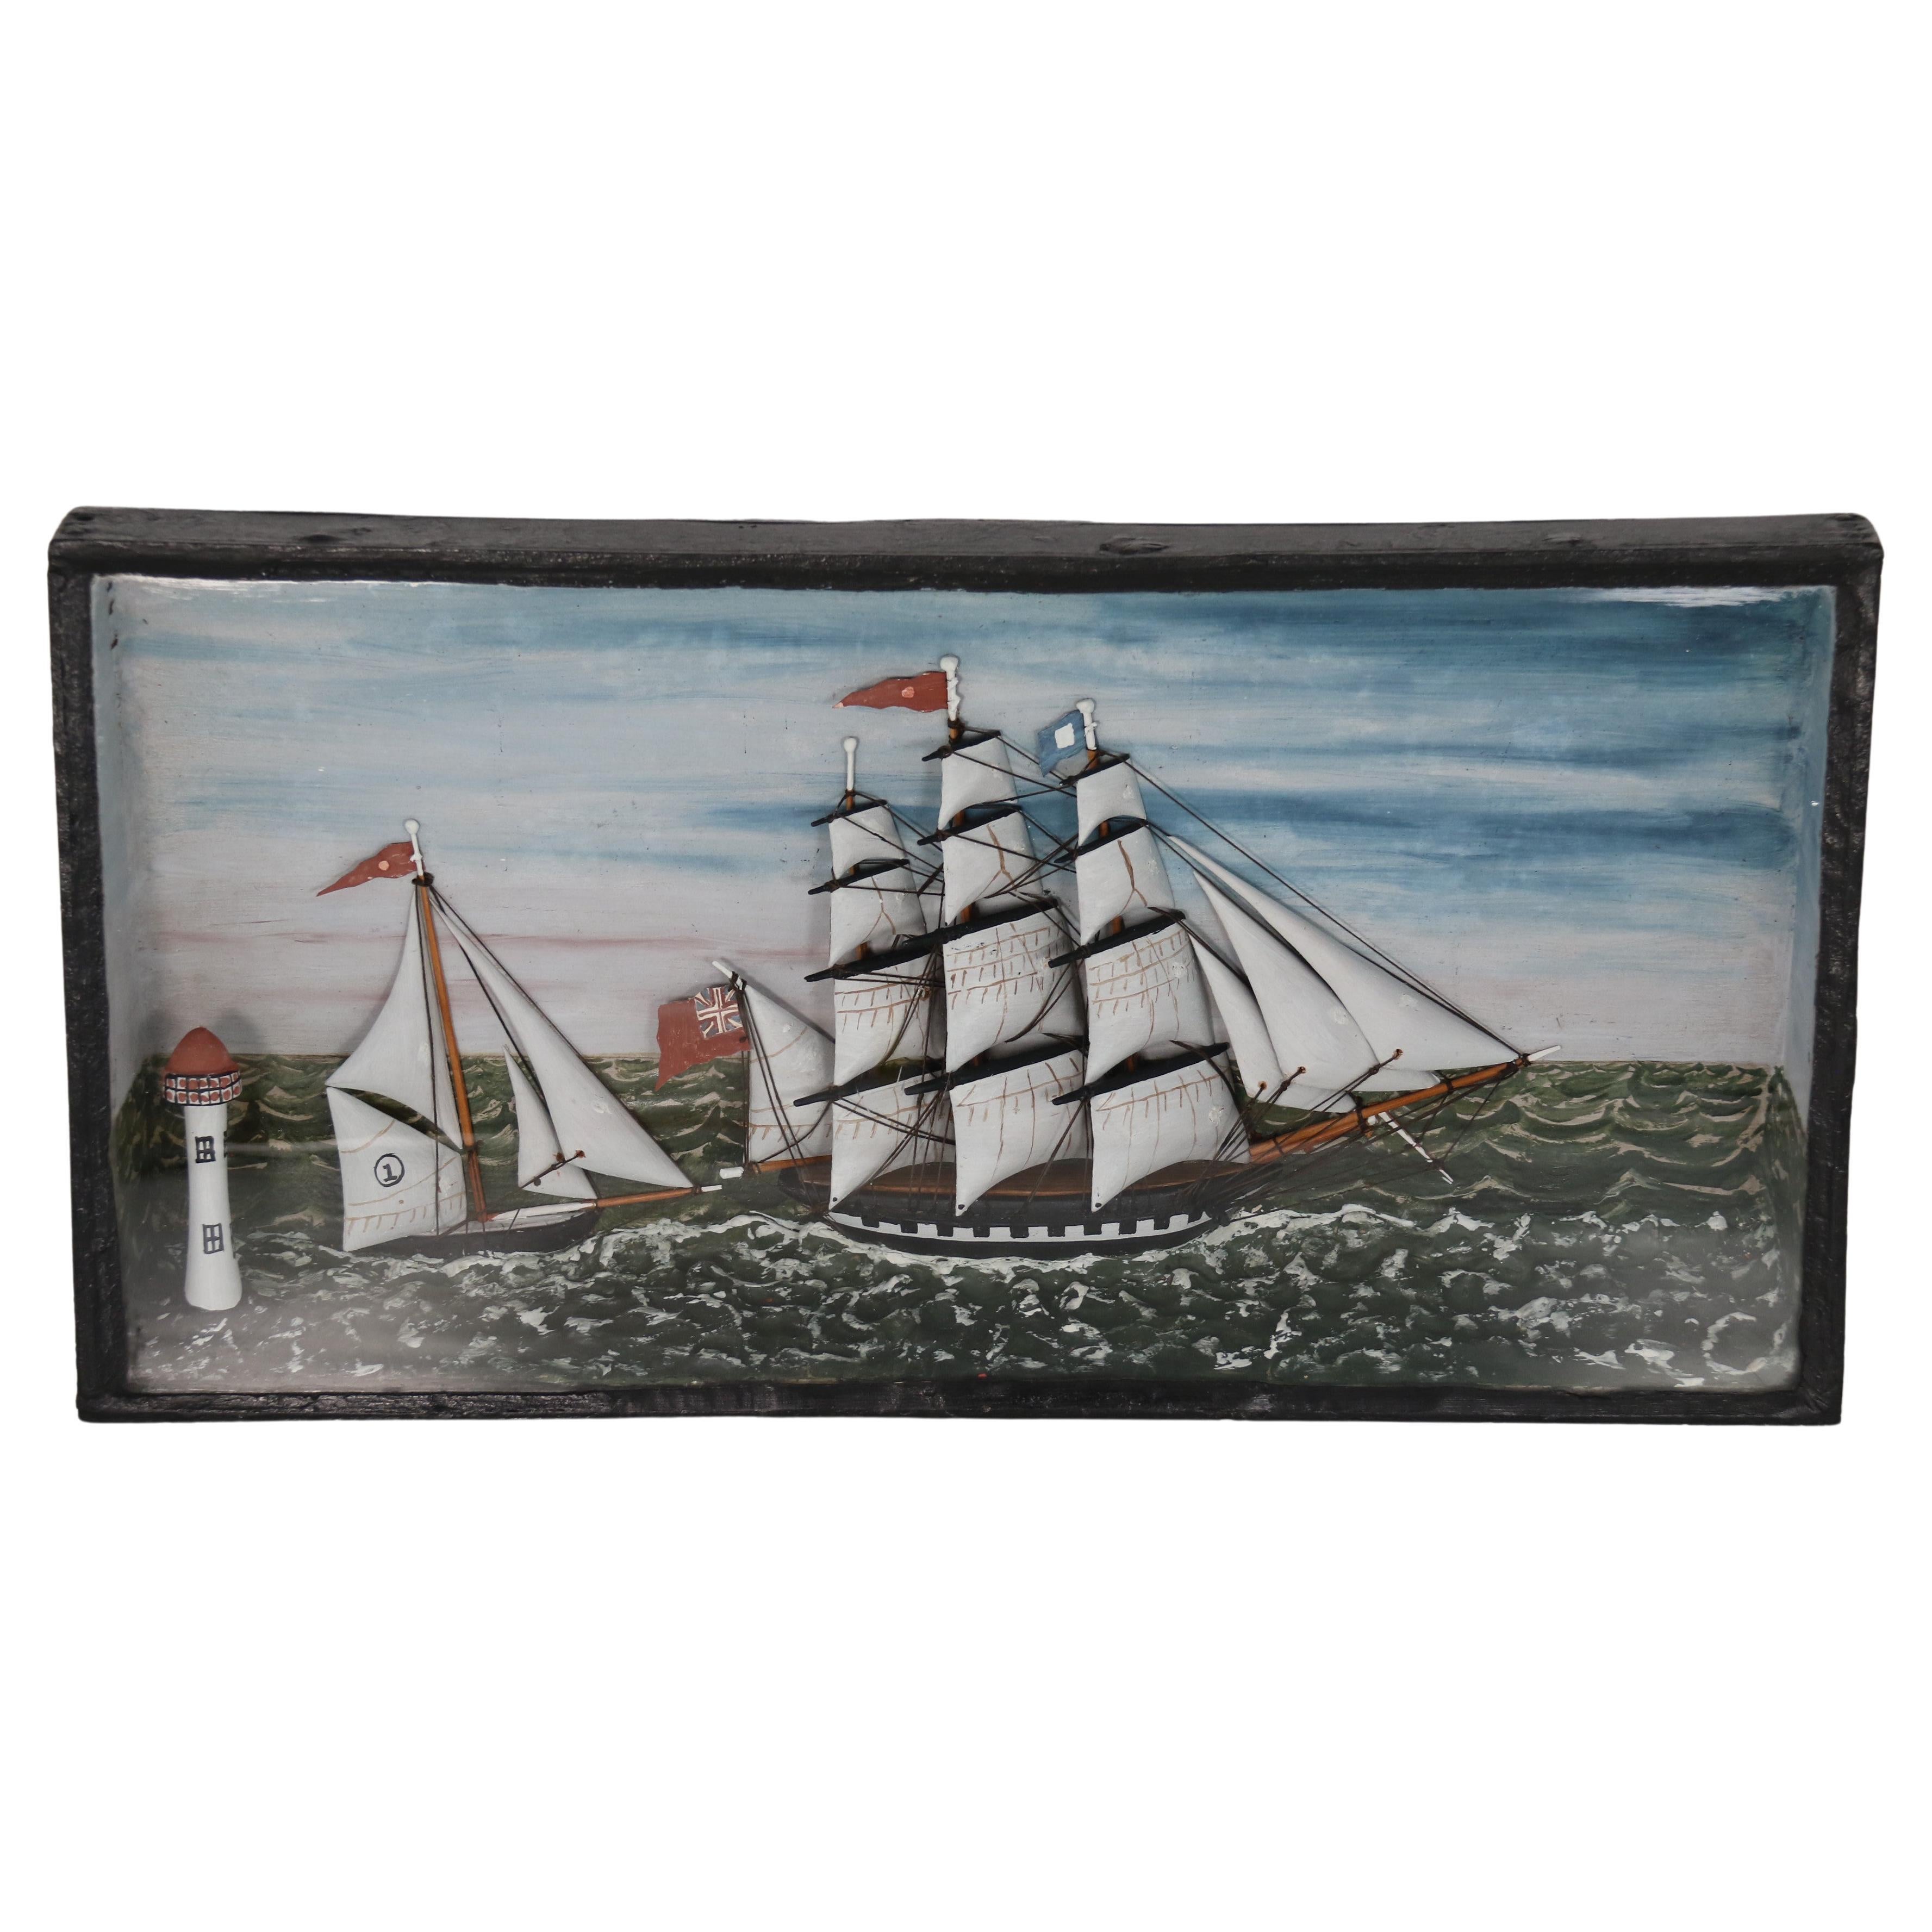 A rare 19th century folk art diorama of two sailing vessels racing at sea. For Sale